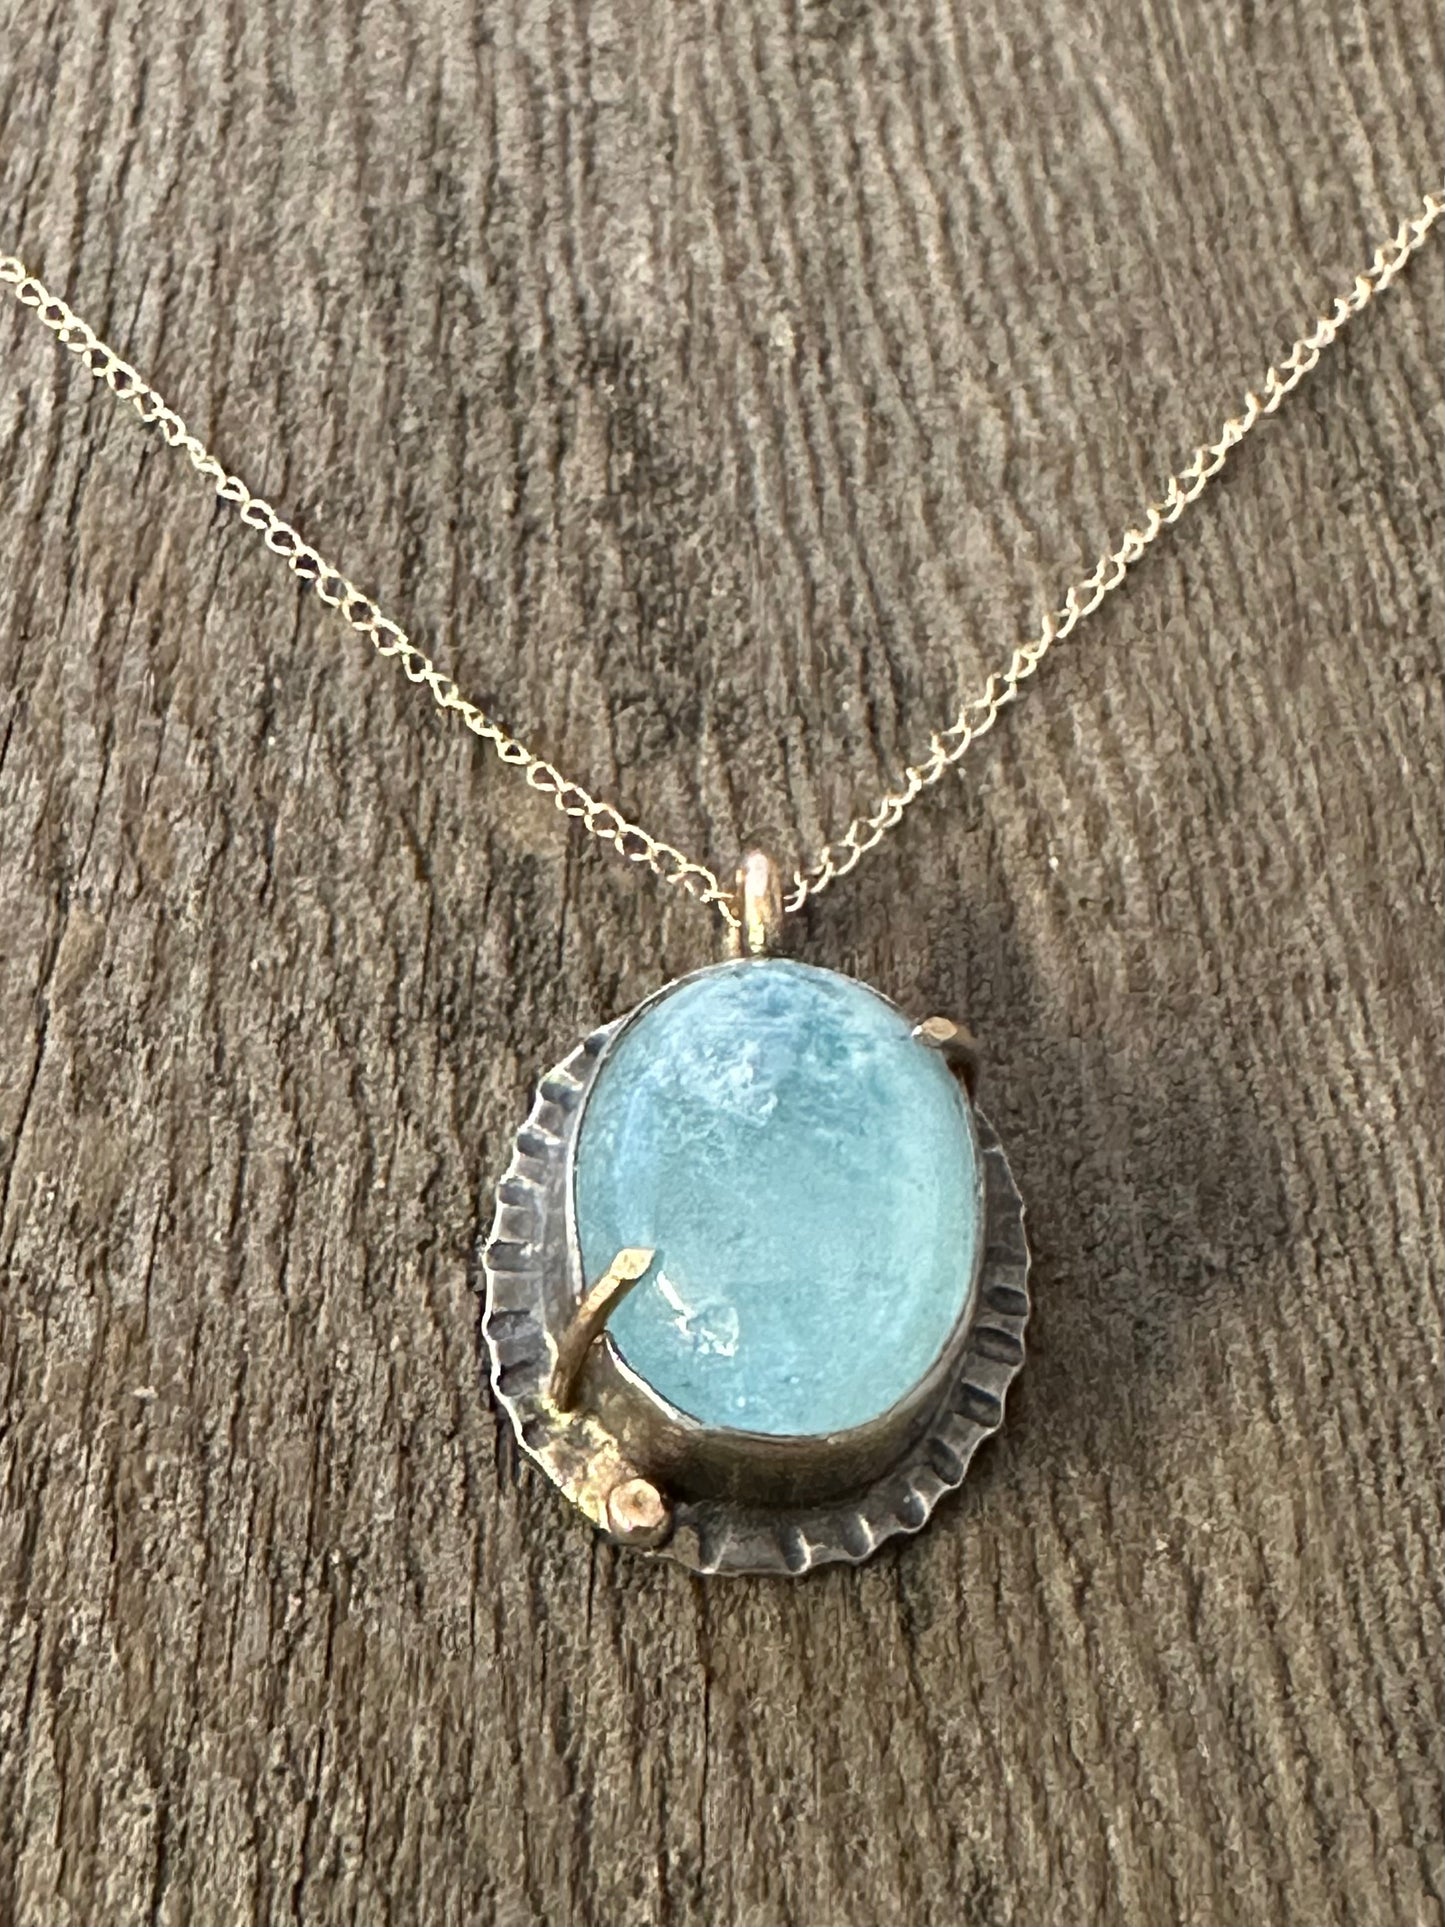 Blue Aquamarine oval stone set in silver with gold prongs and a small gold ball in the lower left corner on a gold chain laying on a wooden background.